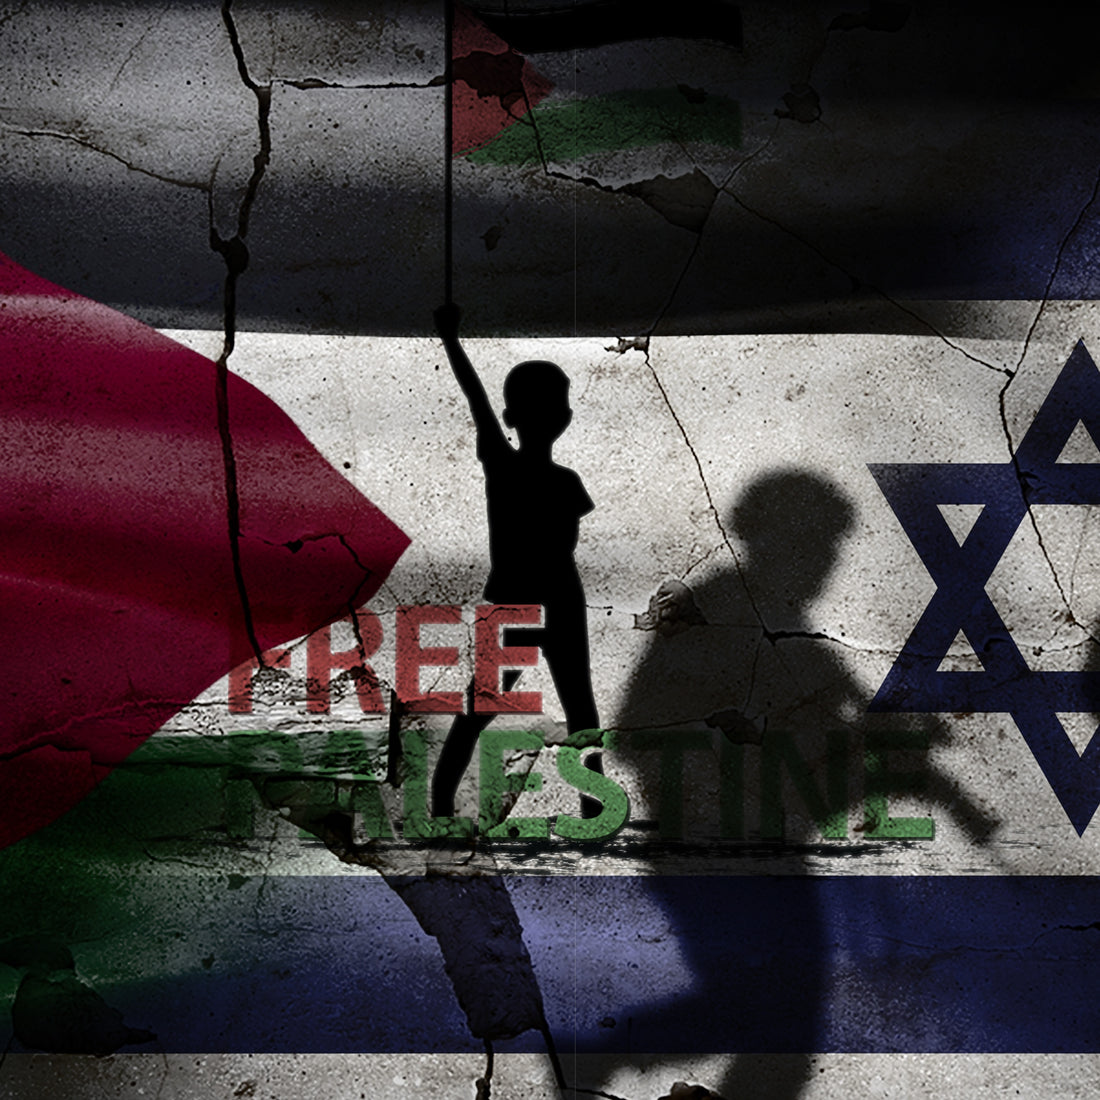 Free Palestine Out now!